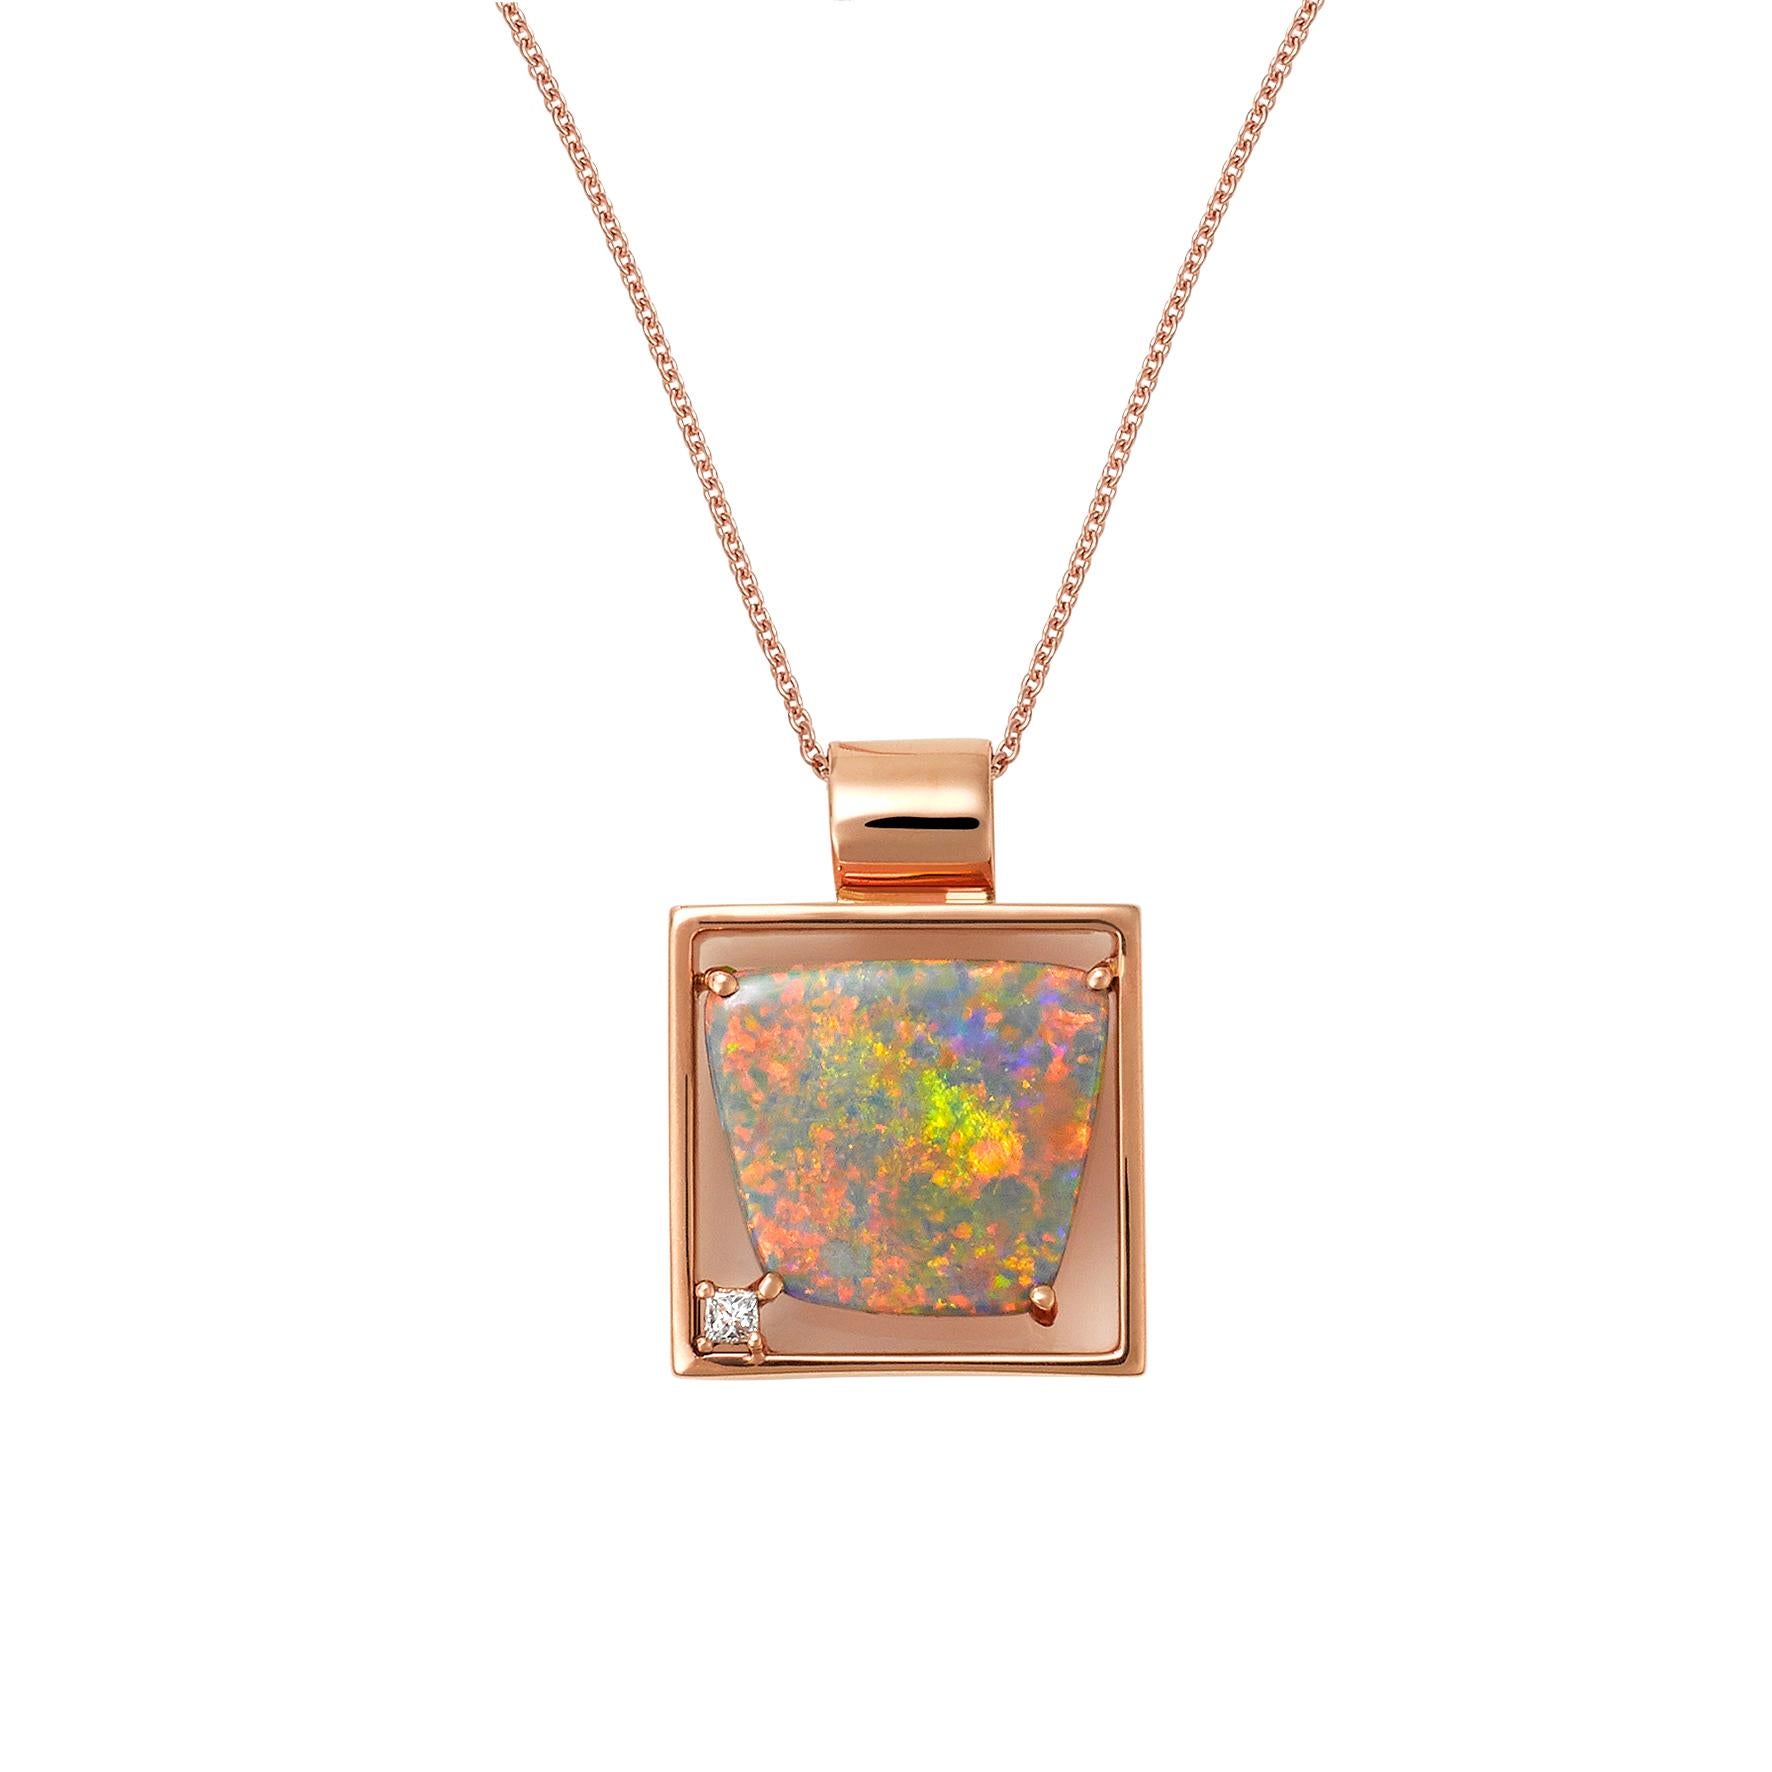 Giulians handcrafted 18 karat rose gold Australian black opal and diamond pendant necklace.  This pendant features a 4.28ct natural solid black opal, from Lightning Ridge NSW, with a light colour and bright green and pink play-of-color.  The opal is